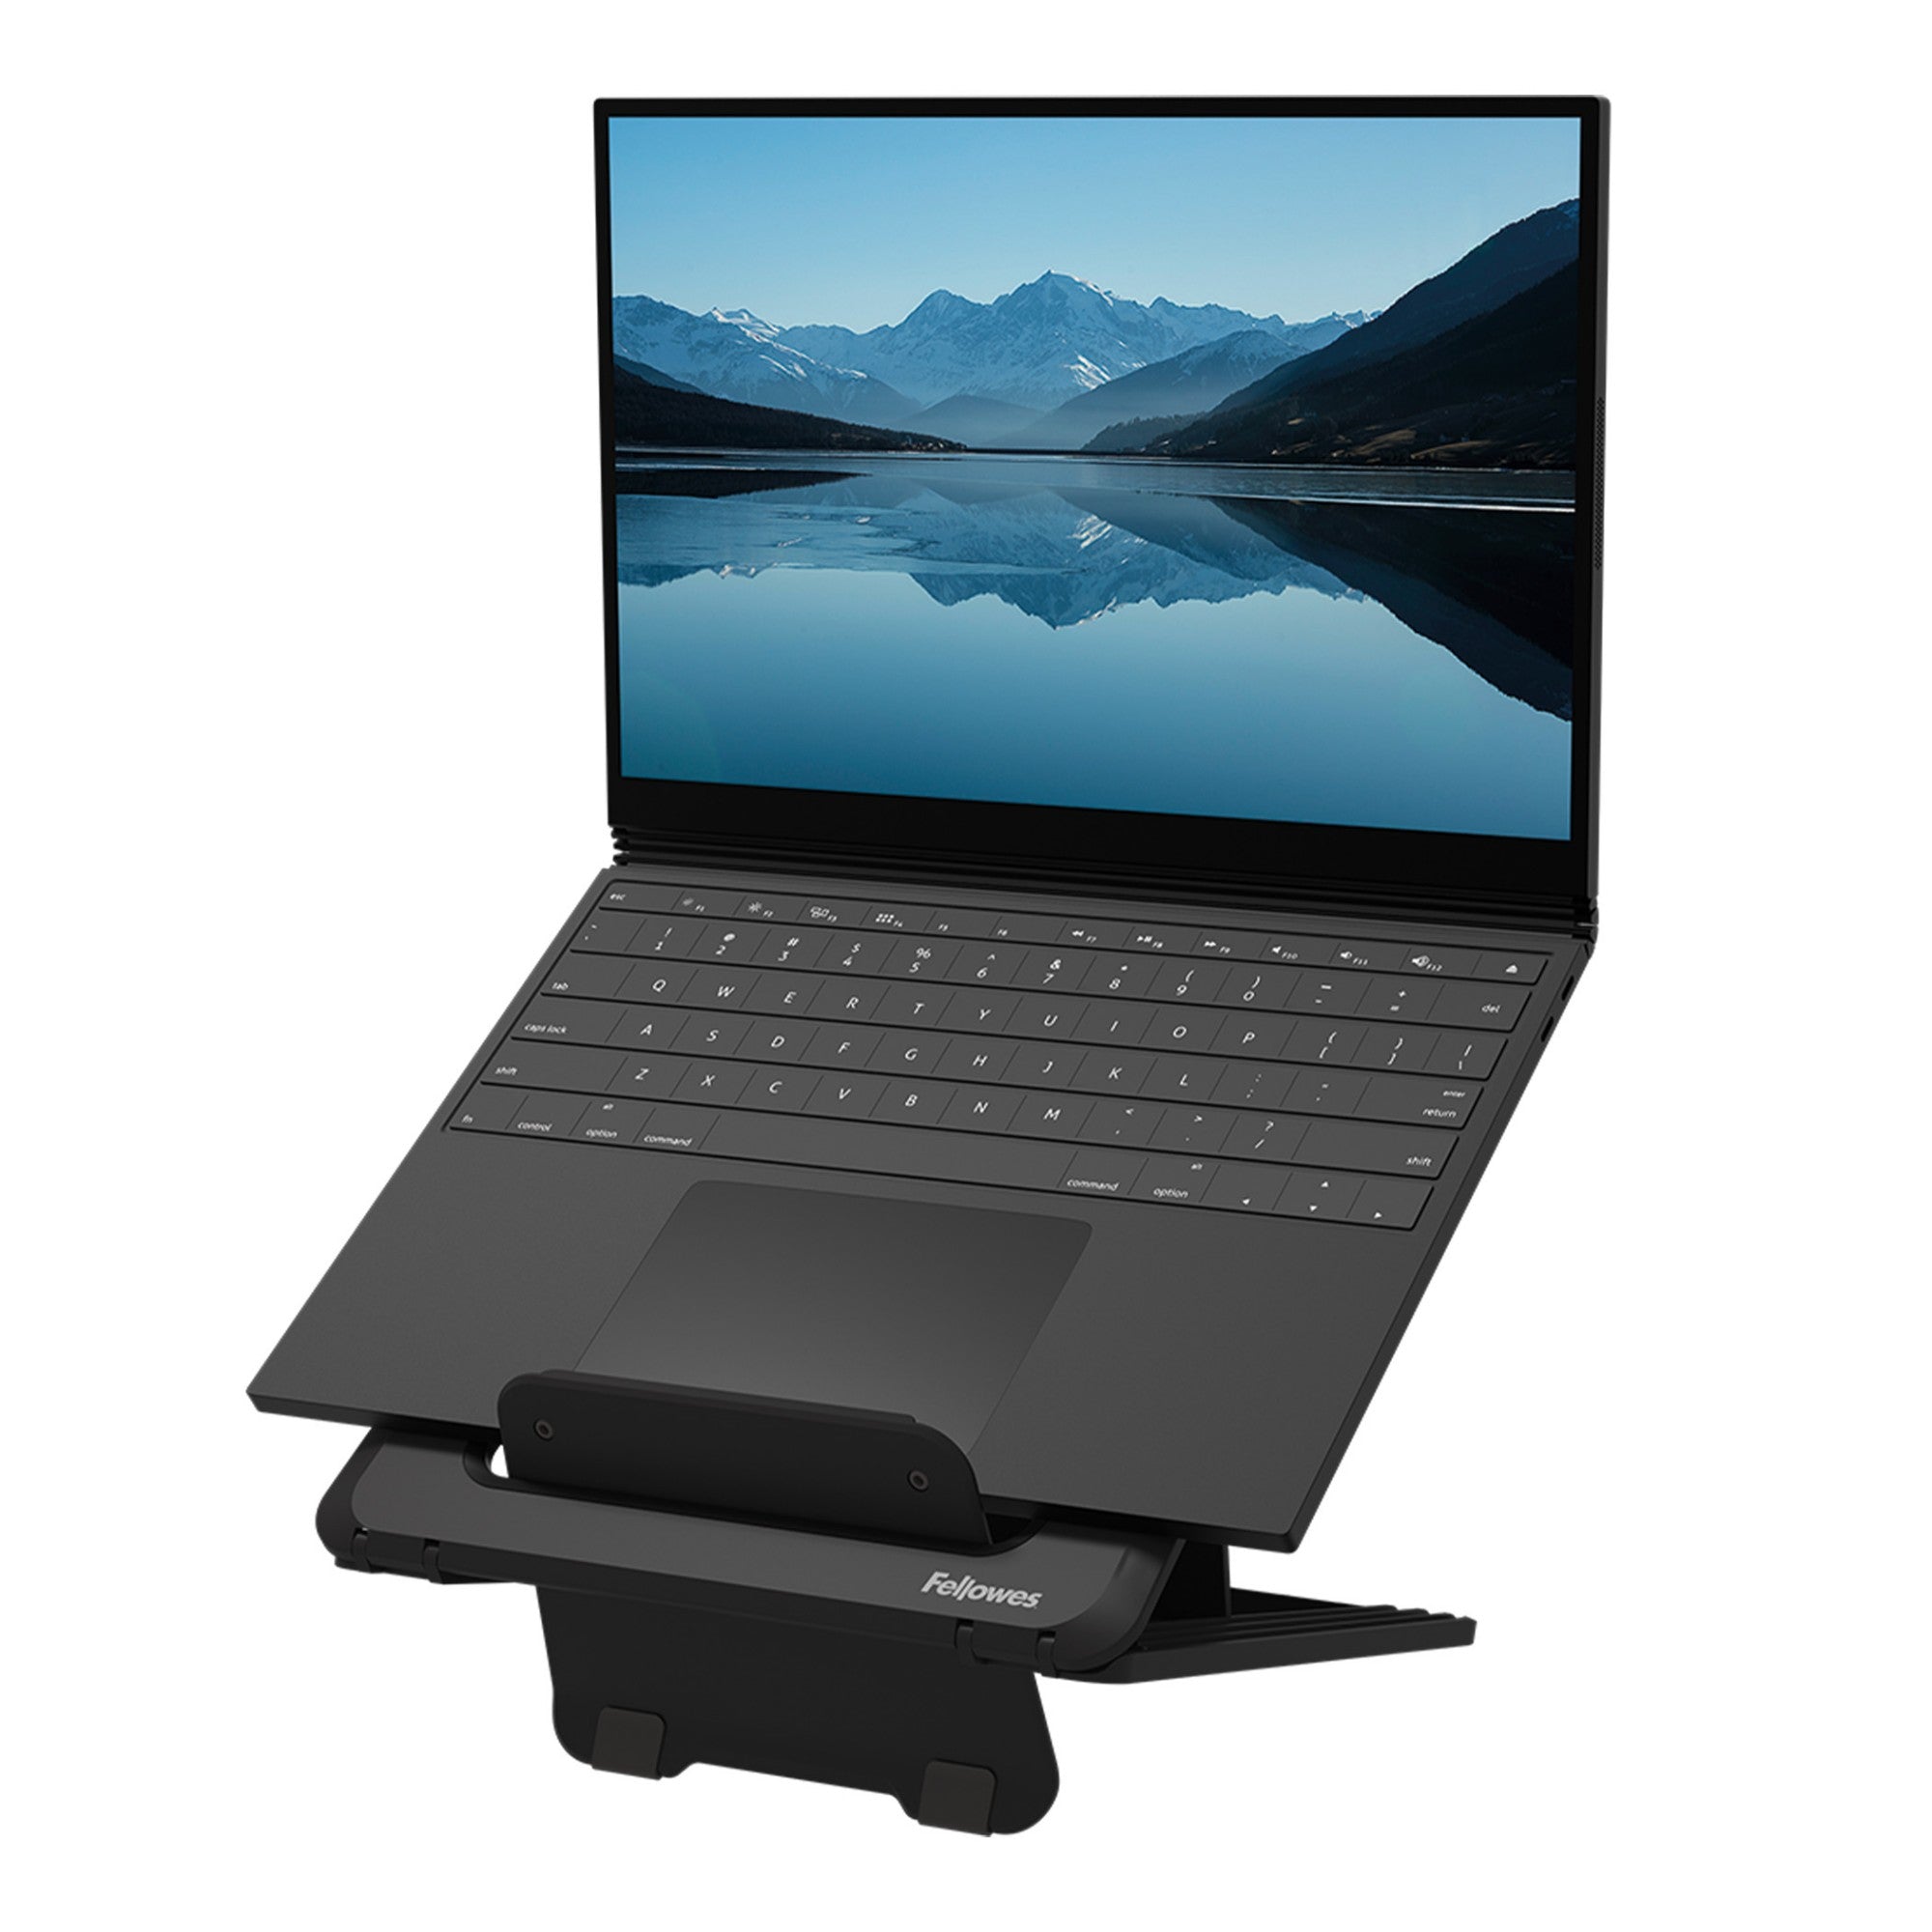 Fellowes Laptop Stand for Desk - Breyta Adjustable Laptop Riser for Home and Office - Portable Laptop Stand with 12 Height Adjustments - Max Laptop Size 14"